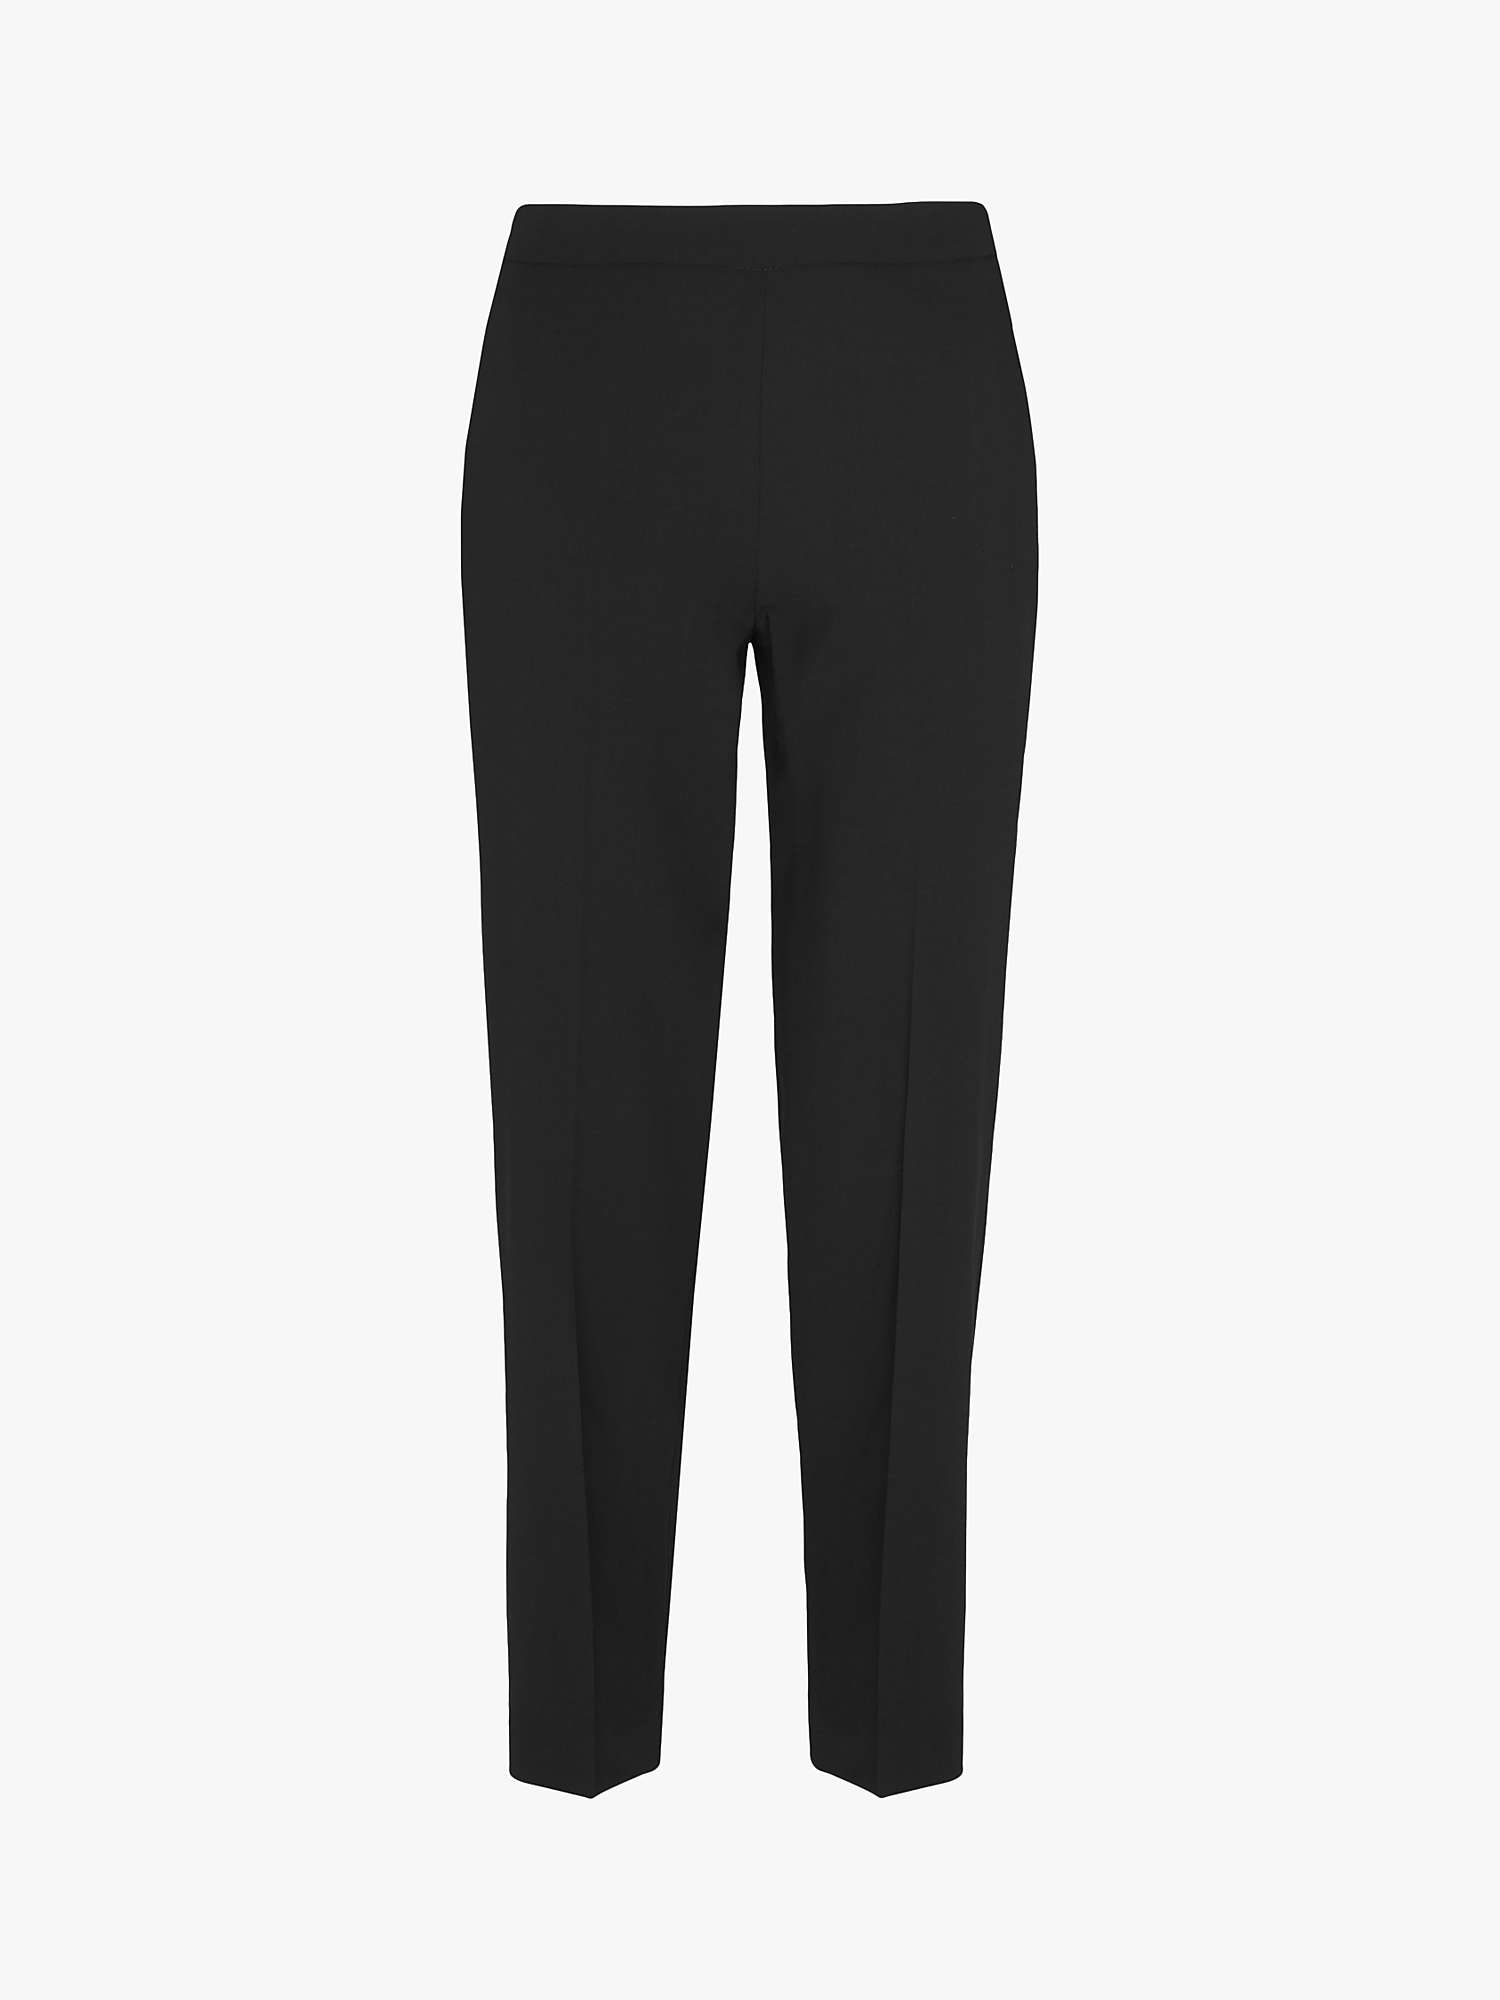 Whistles Anna Wool Blend Trousers, Black at John Lewis & Partners